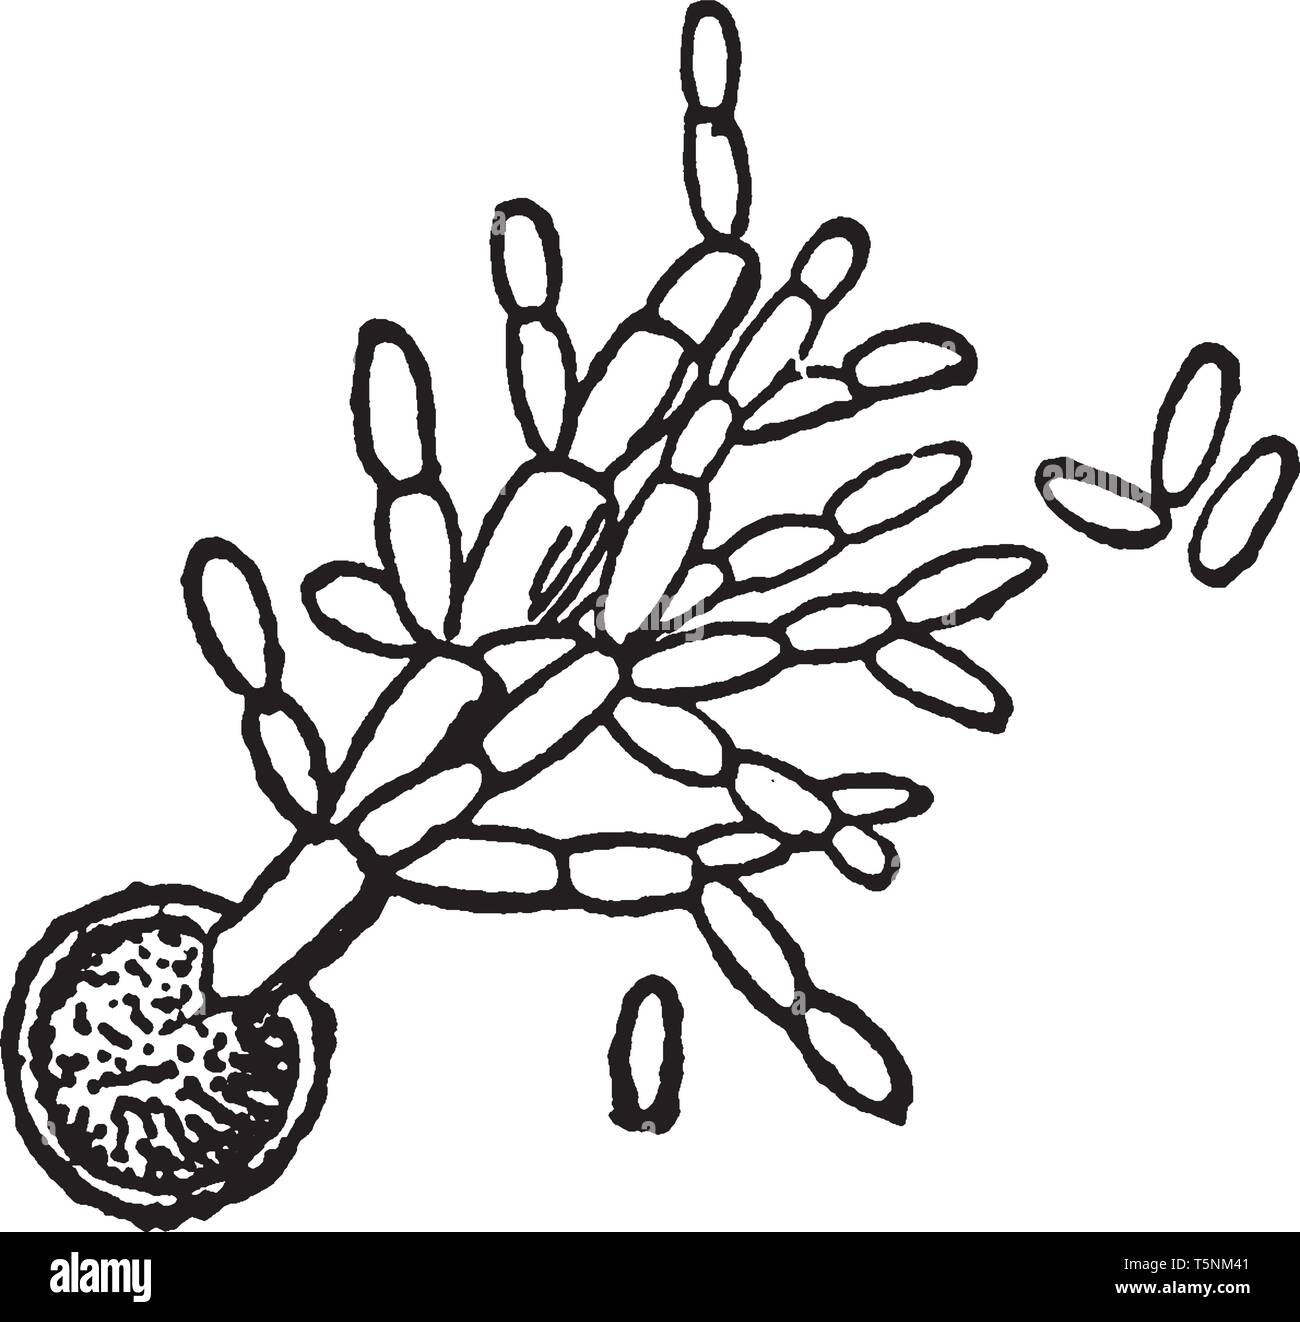 A picture showing the Germinating spore, with secondary spores or conidia, vintage line drawing or engraving illustration. Stock Vector